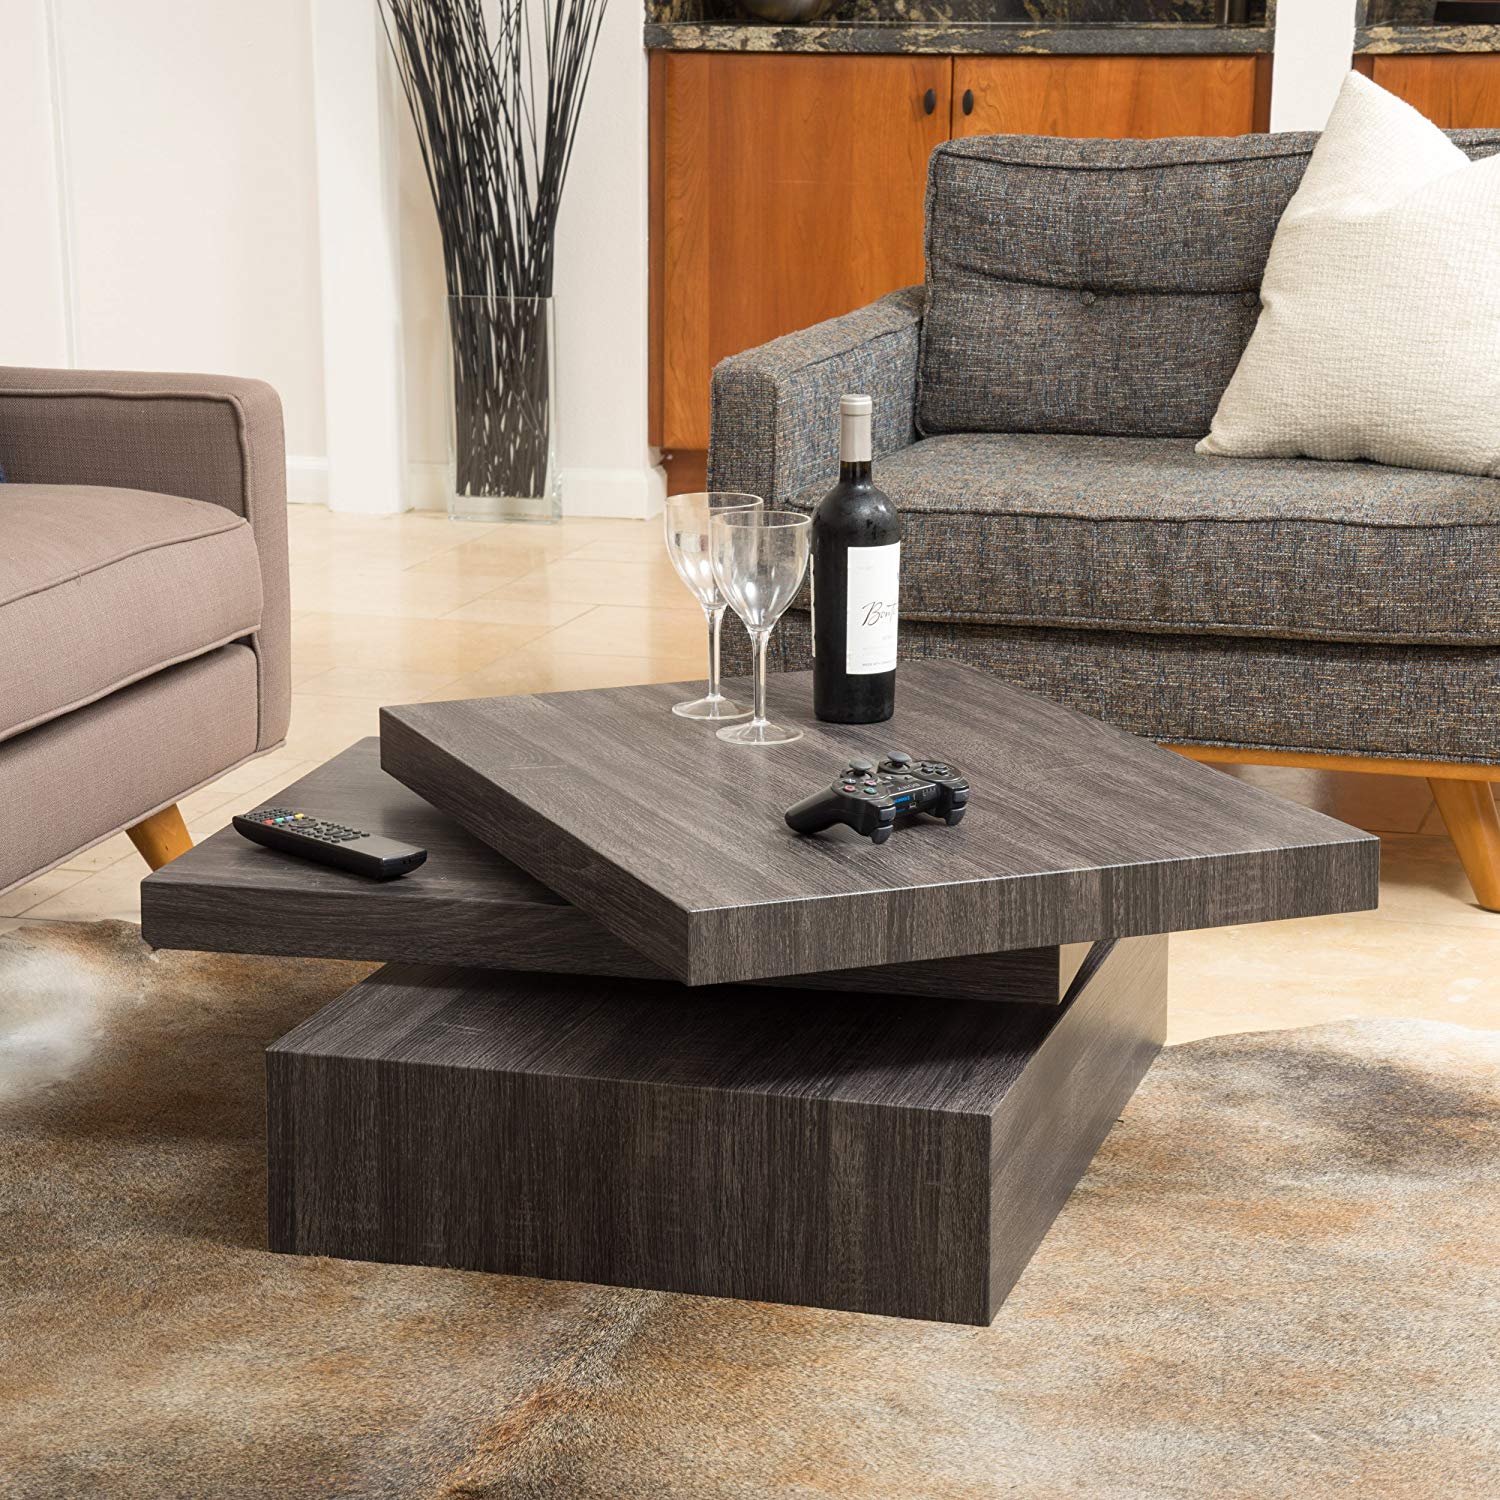 4 Advantages Of Extra Large Coffee Tables With Storage